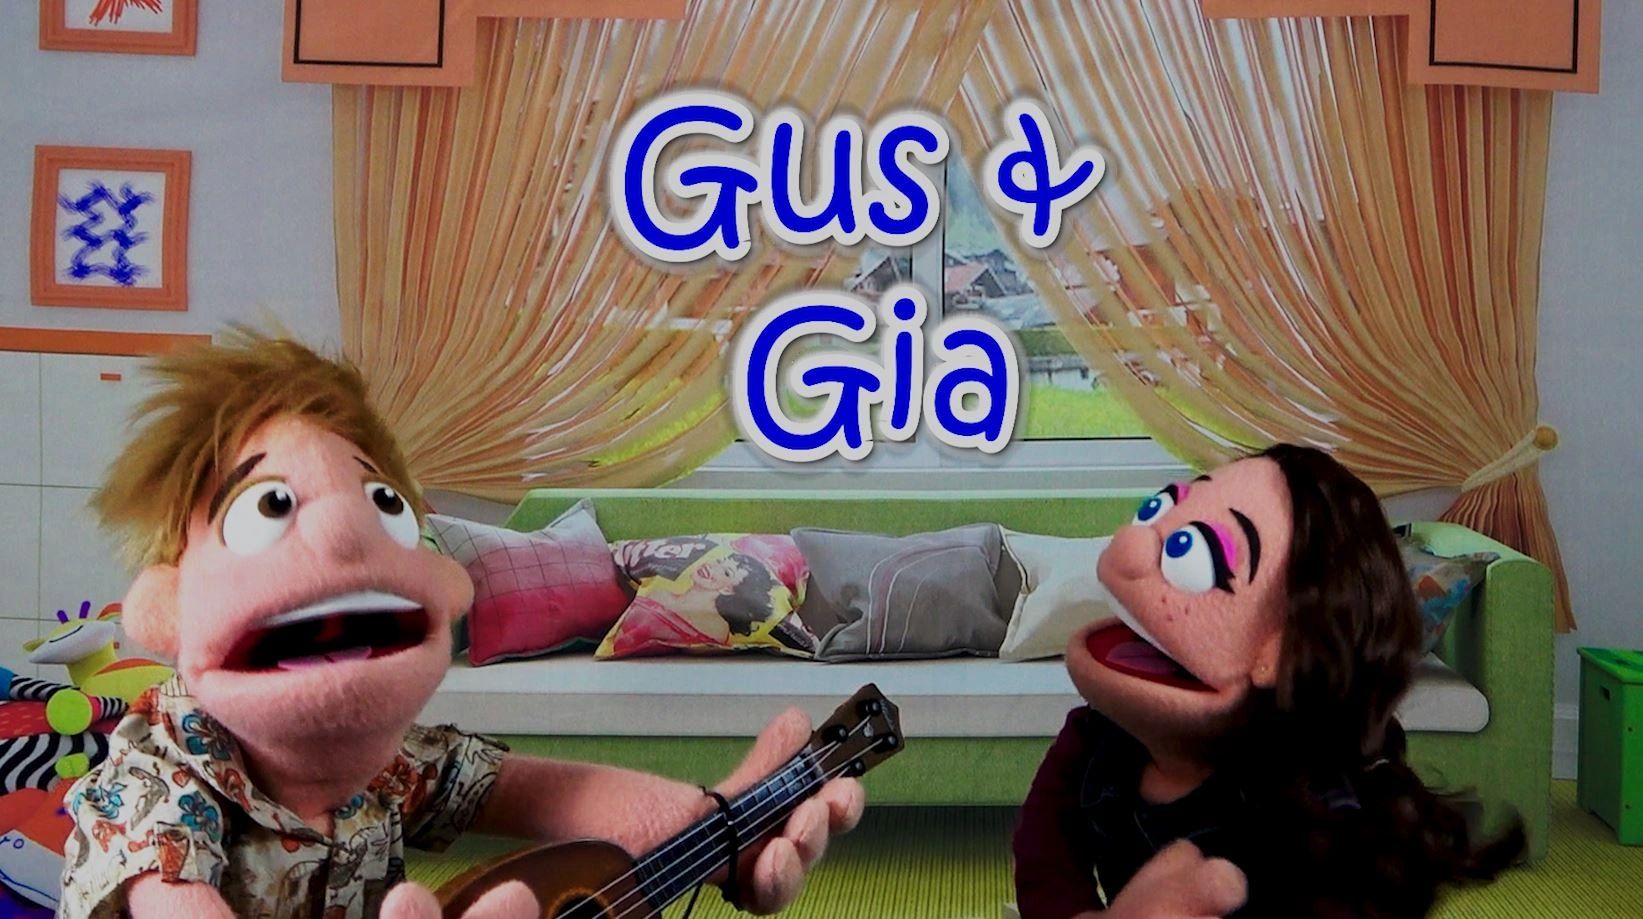 Gus and Gia Puppet Show! 
A family friendly puppet show loved by all ages!